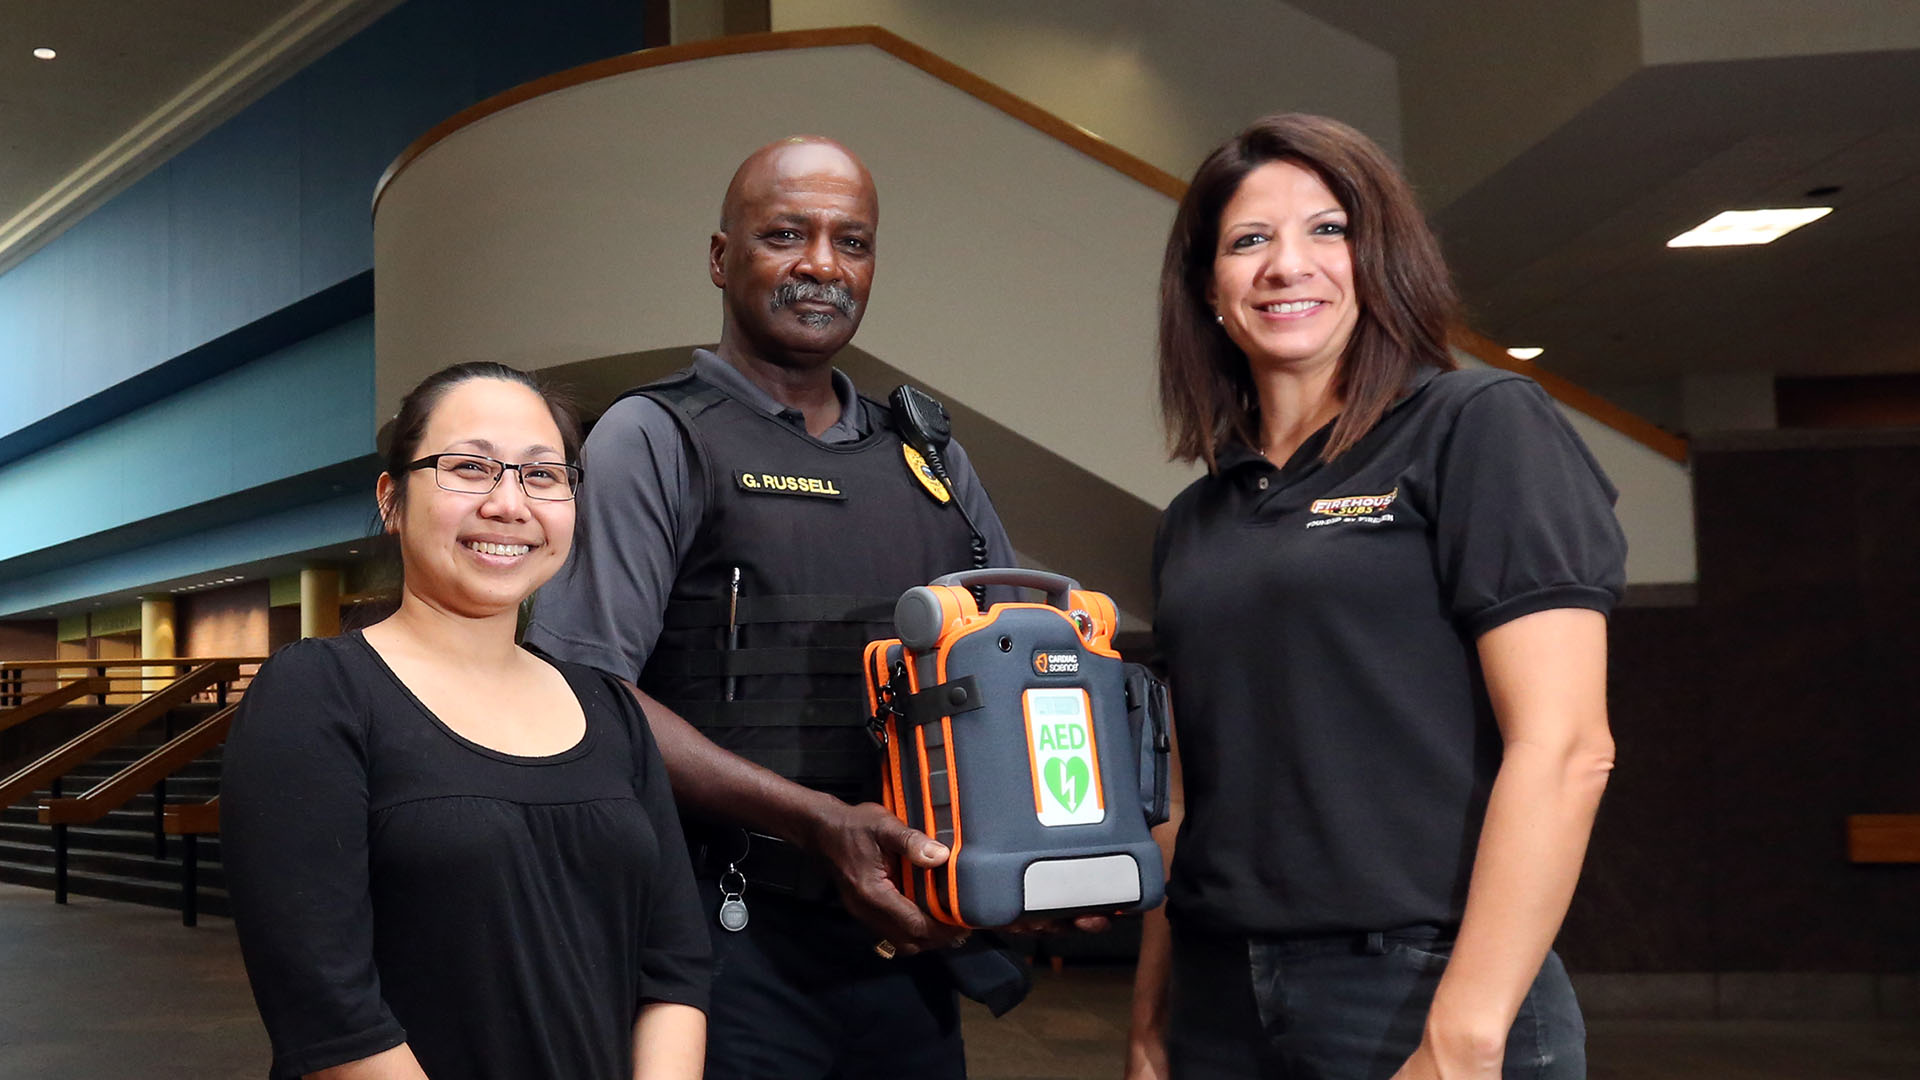 Em Smail, supervisor of JCCC Dining Services, Gregory Russell, chief of police, and Tara Ruff, franchise owner of the Firehouse Subs in the JCCC food court, show off the new campus AED device. Photo by Susan McSpadden/JCCC